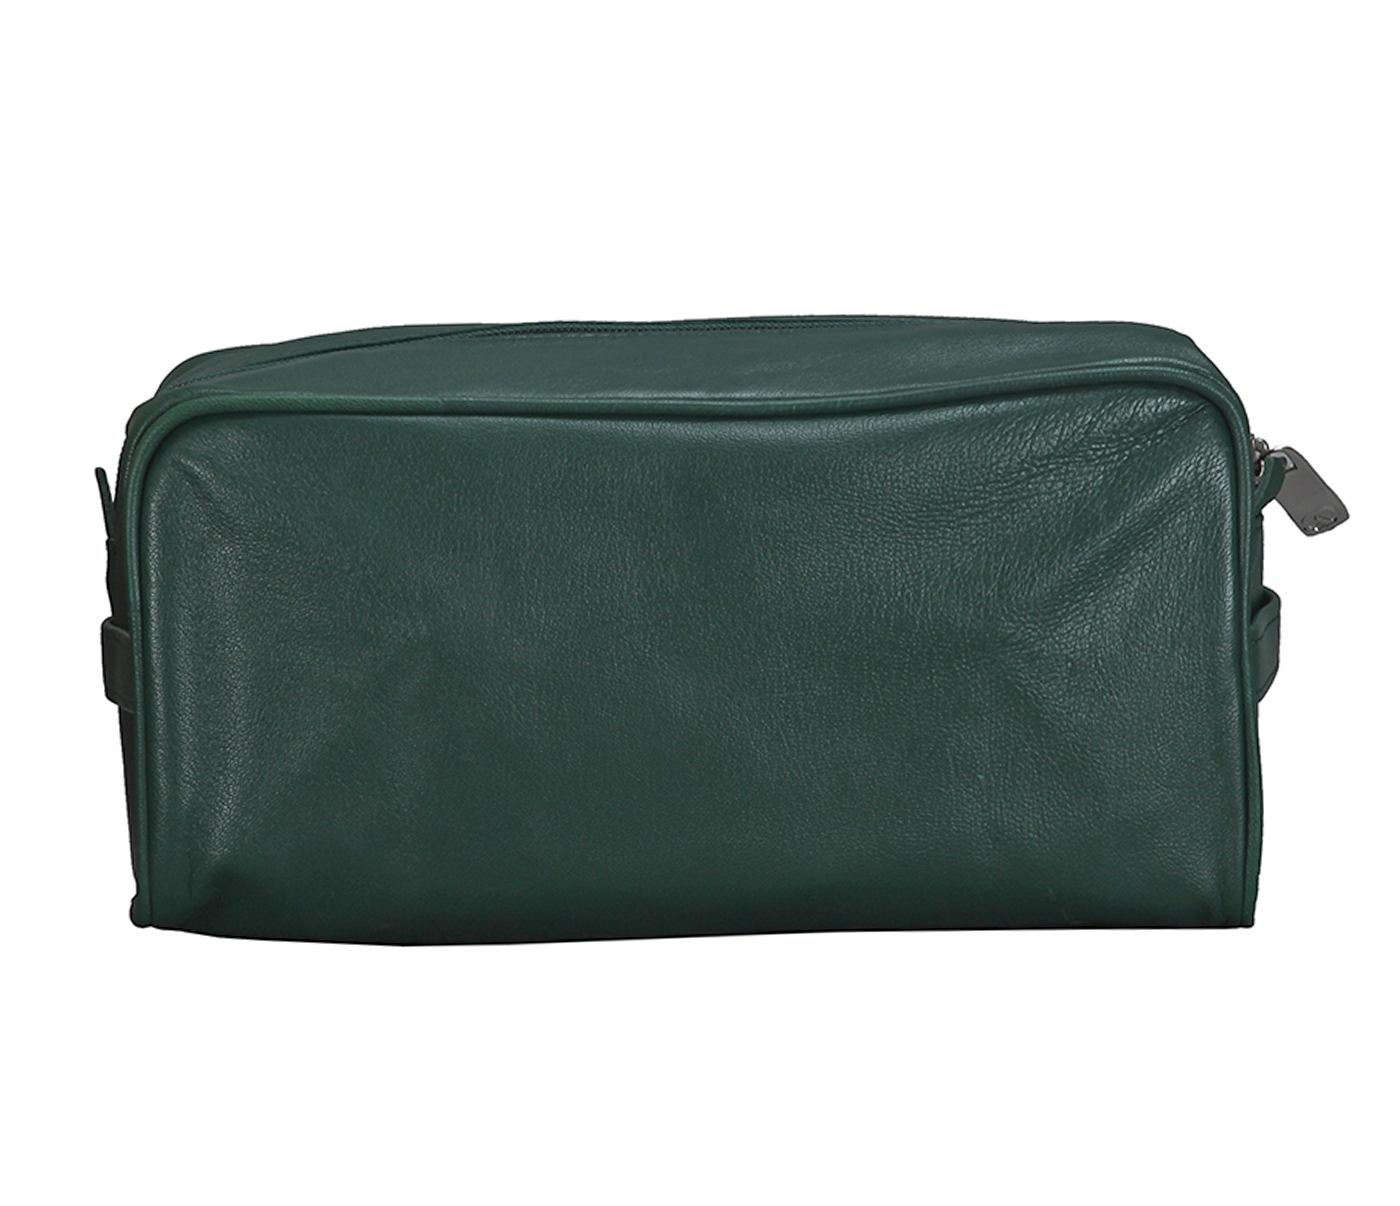 SC1--Unisex Wash & Toiletry travel Bag in Genuine Leather - Green